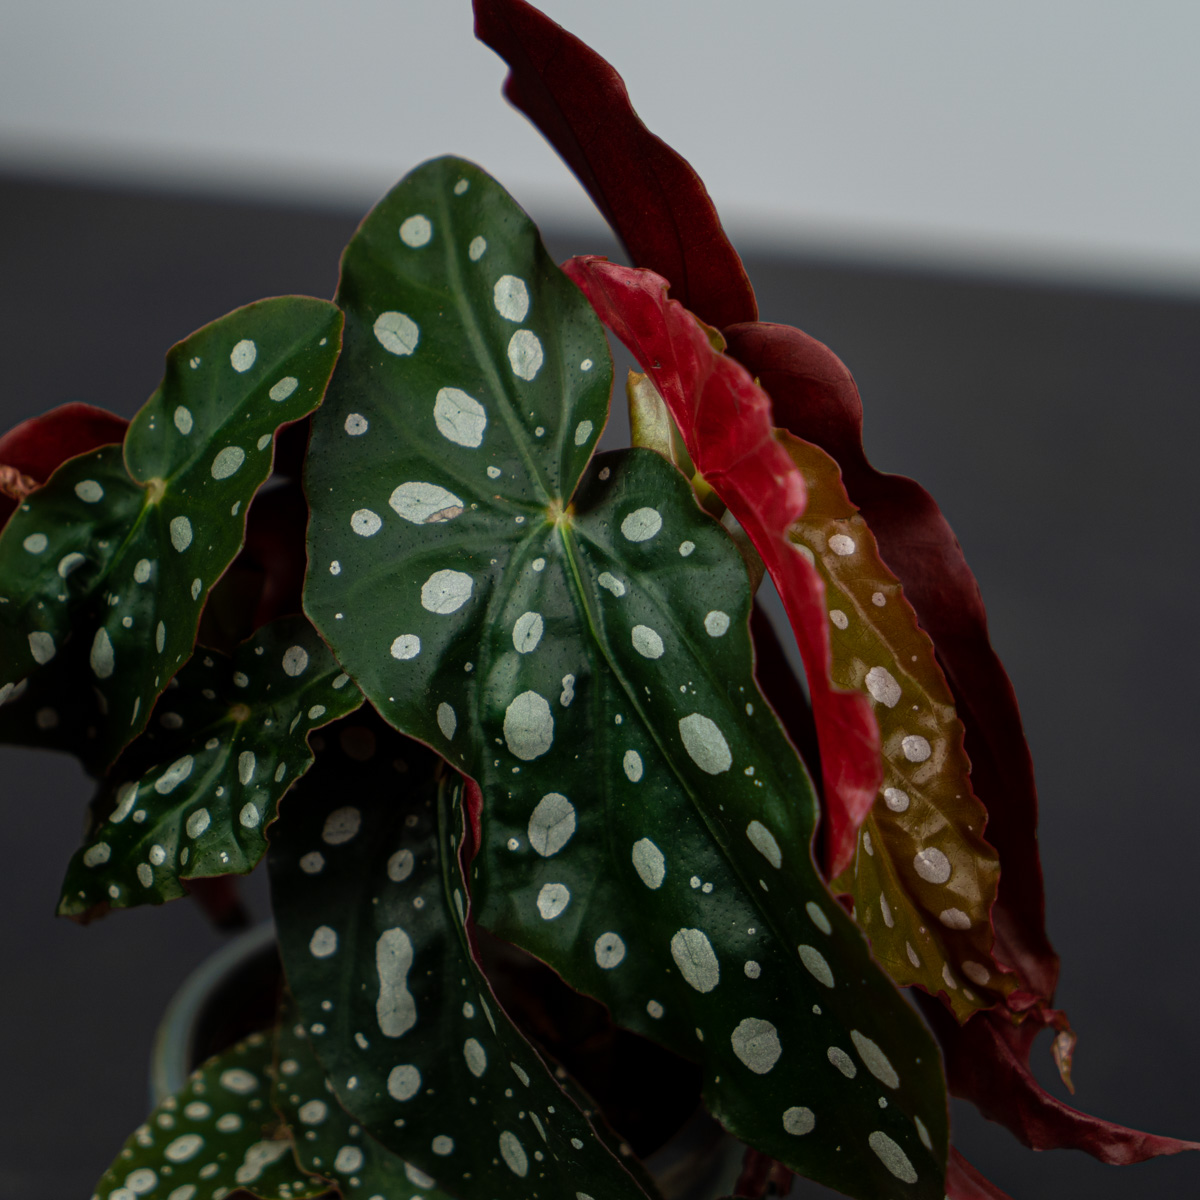 Begonia Maculata Seed Pods / The begonia maculata plant bloom from ...